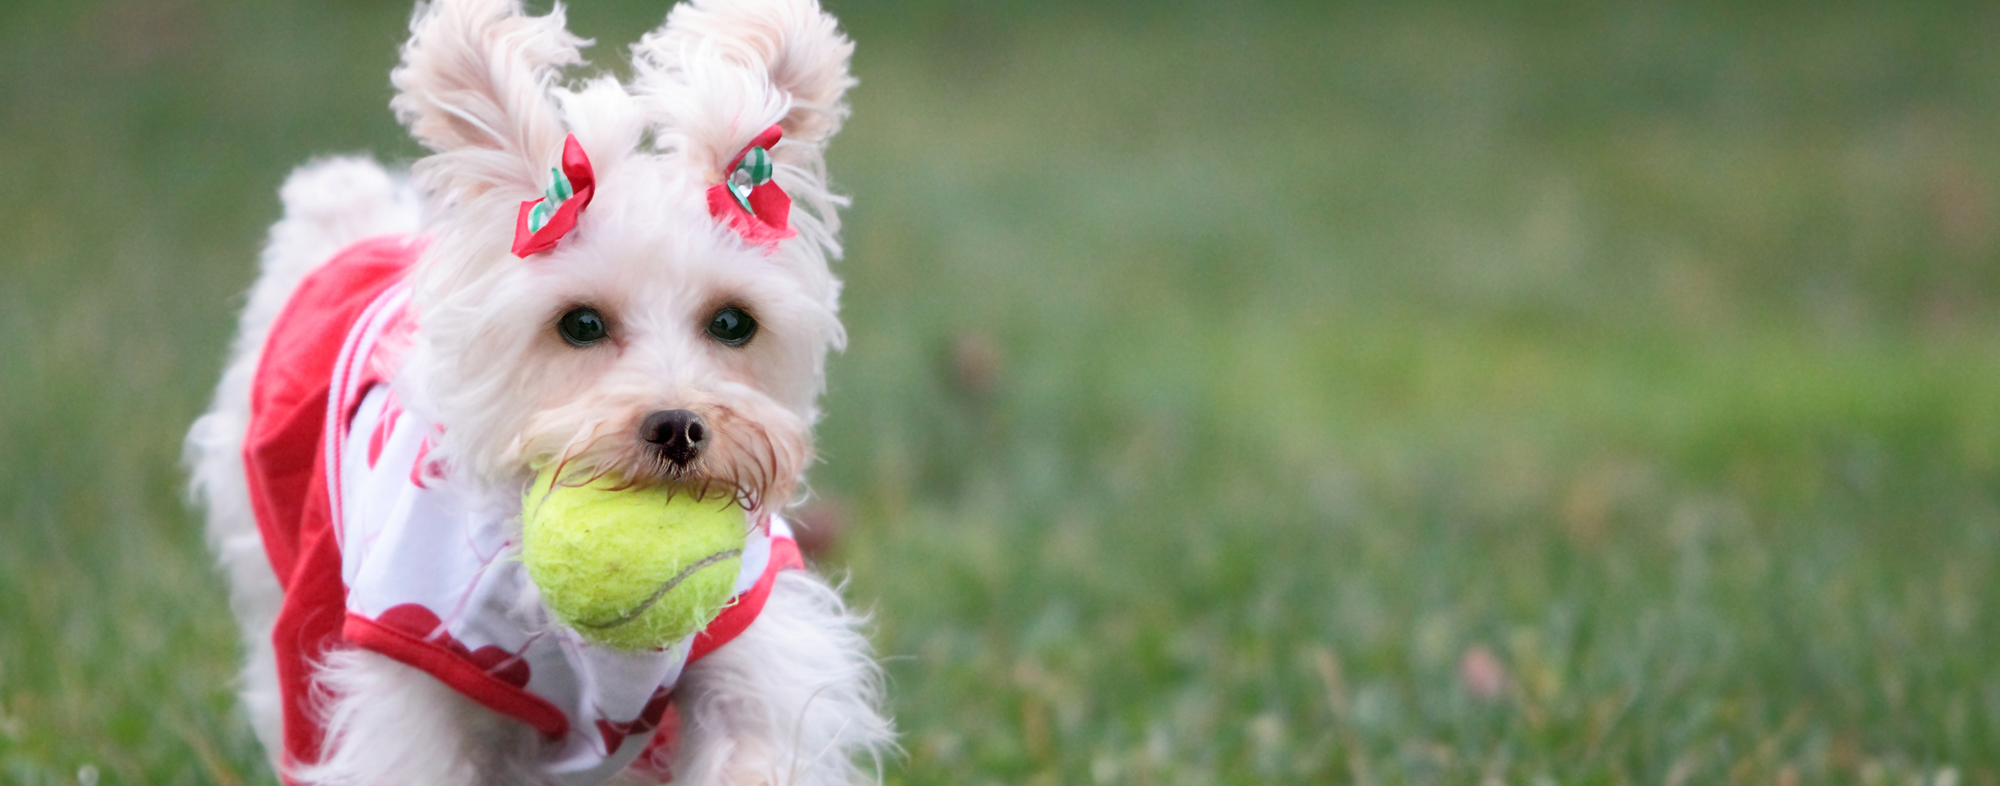 Small dog clutching a tennis ball in their mouth, dressed in clothing